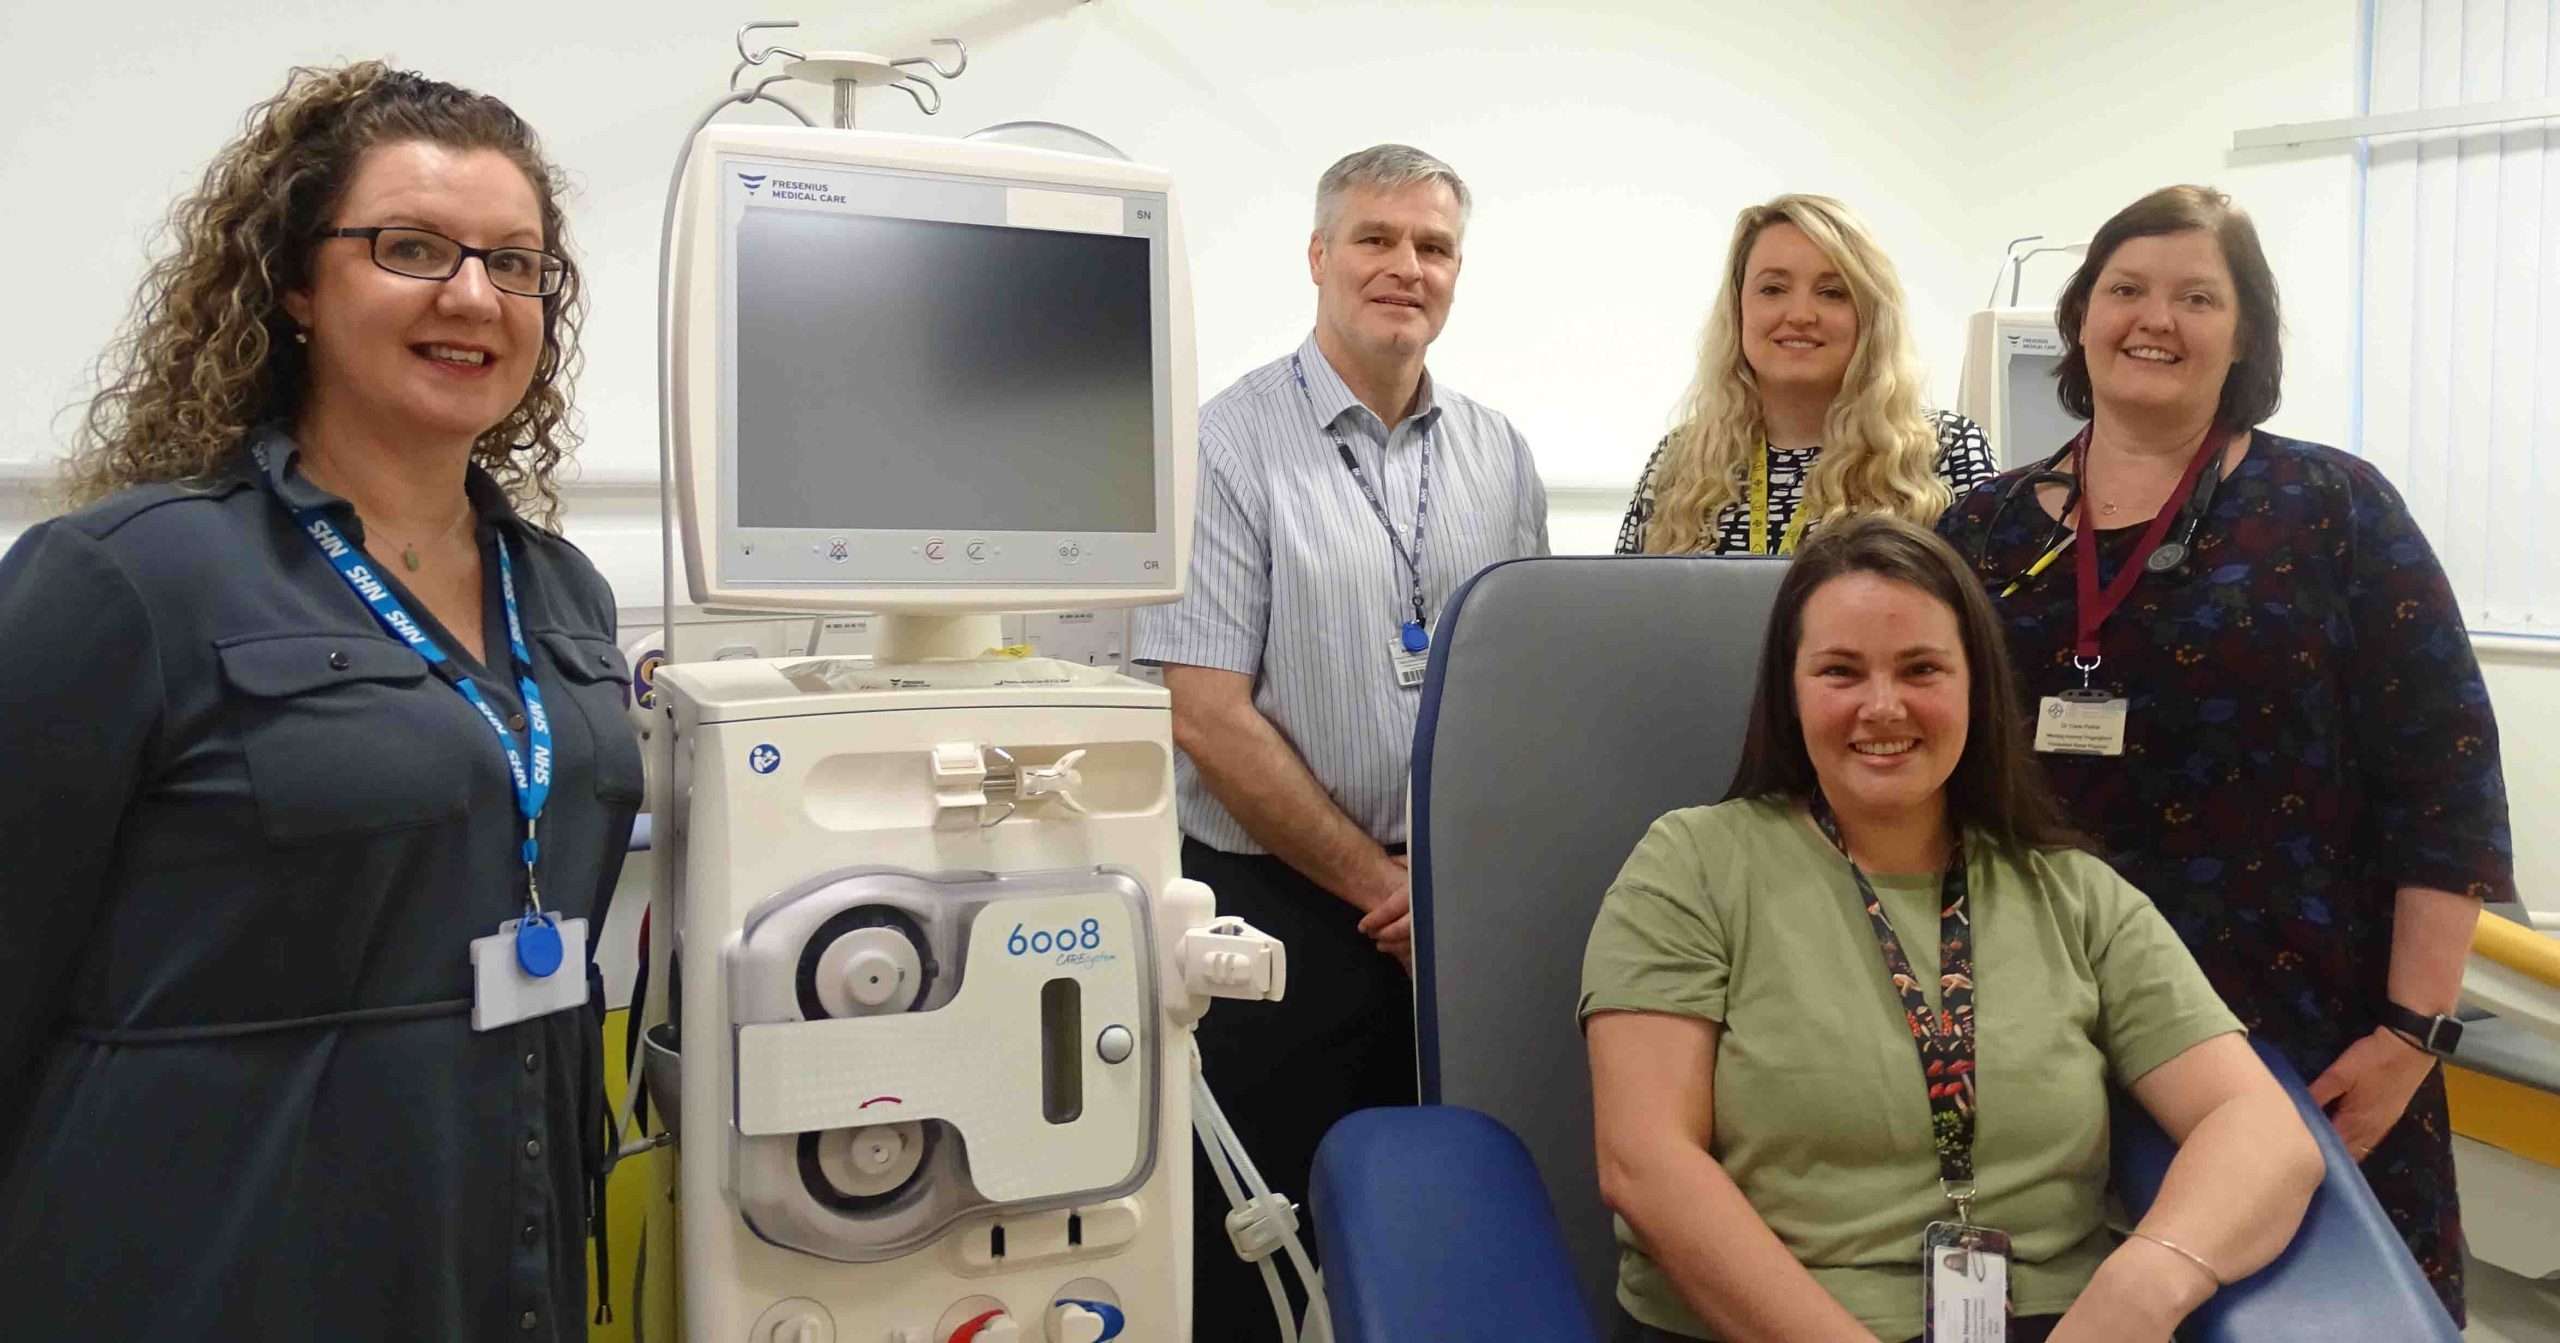 £70 million investment is transforming the care of dialysis patients